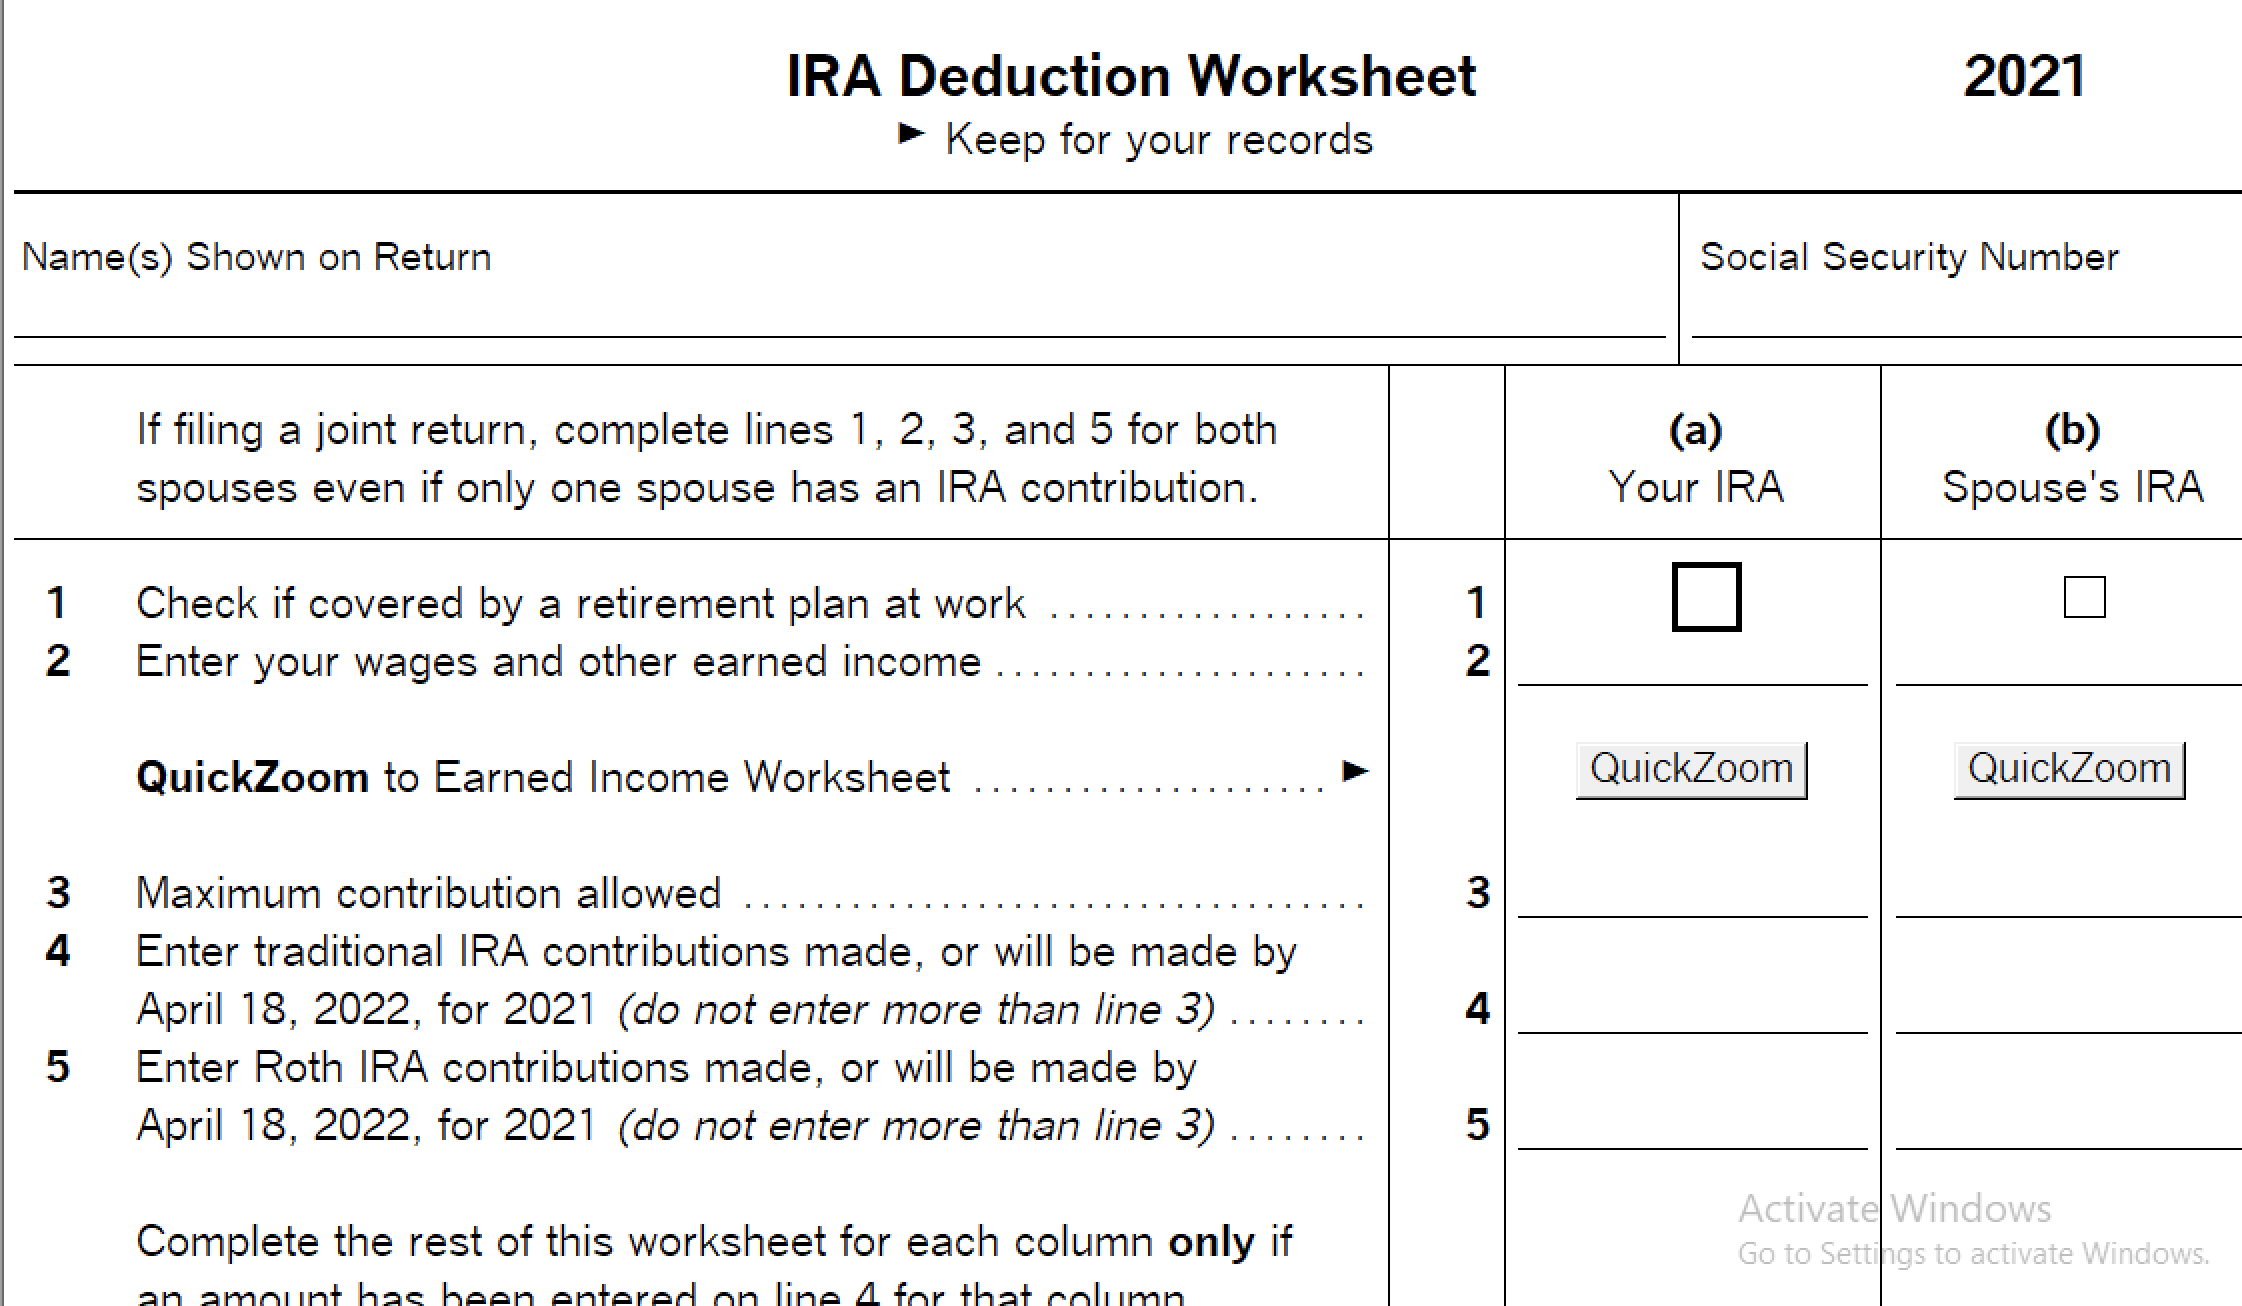 ira-deductions-proseries.png